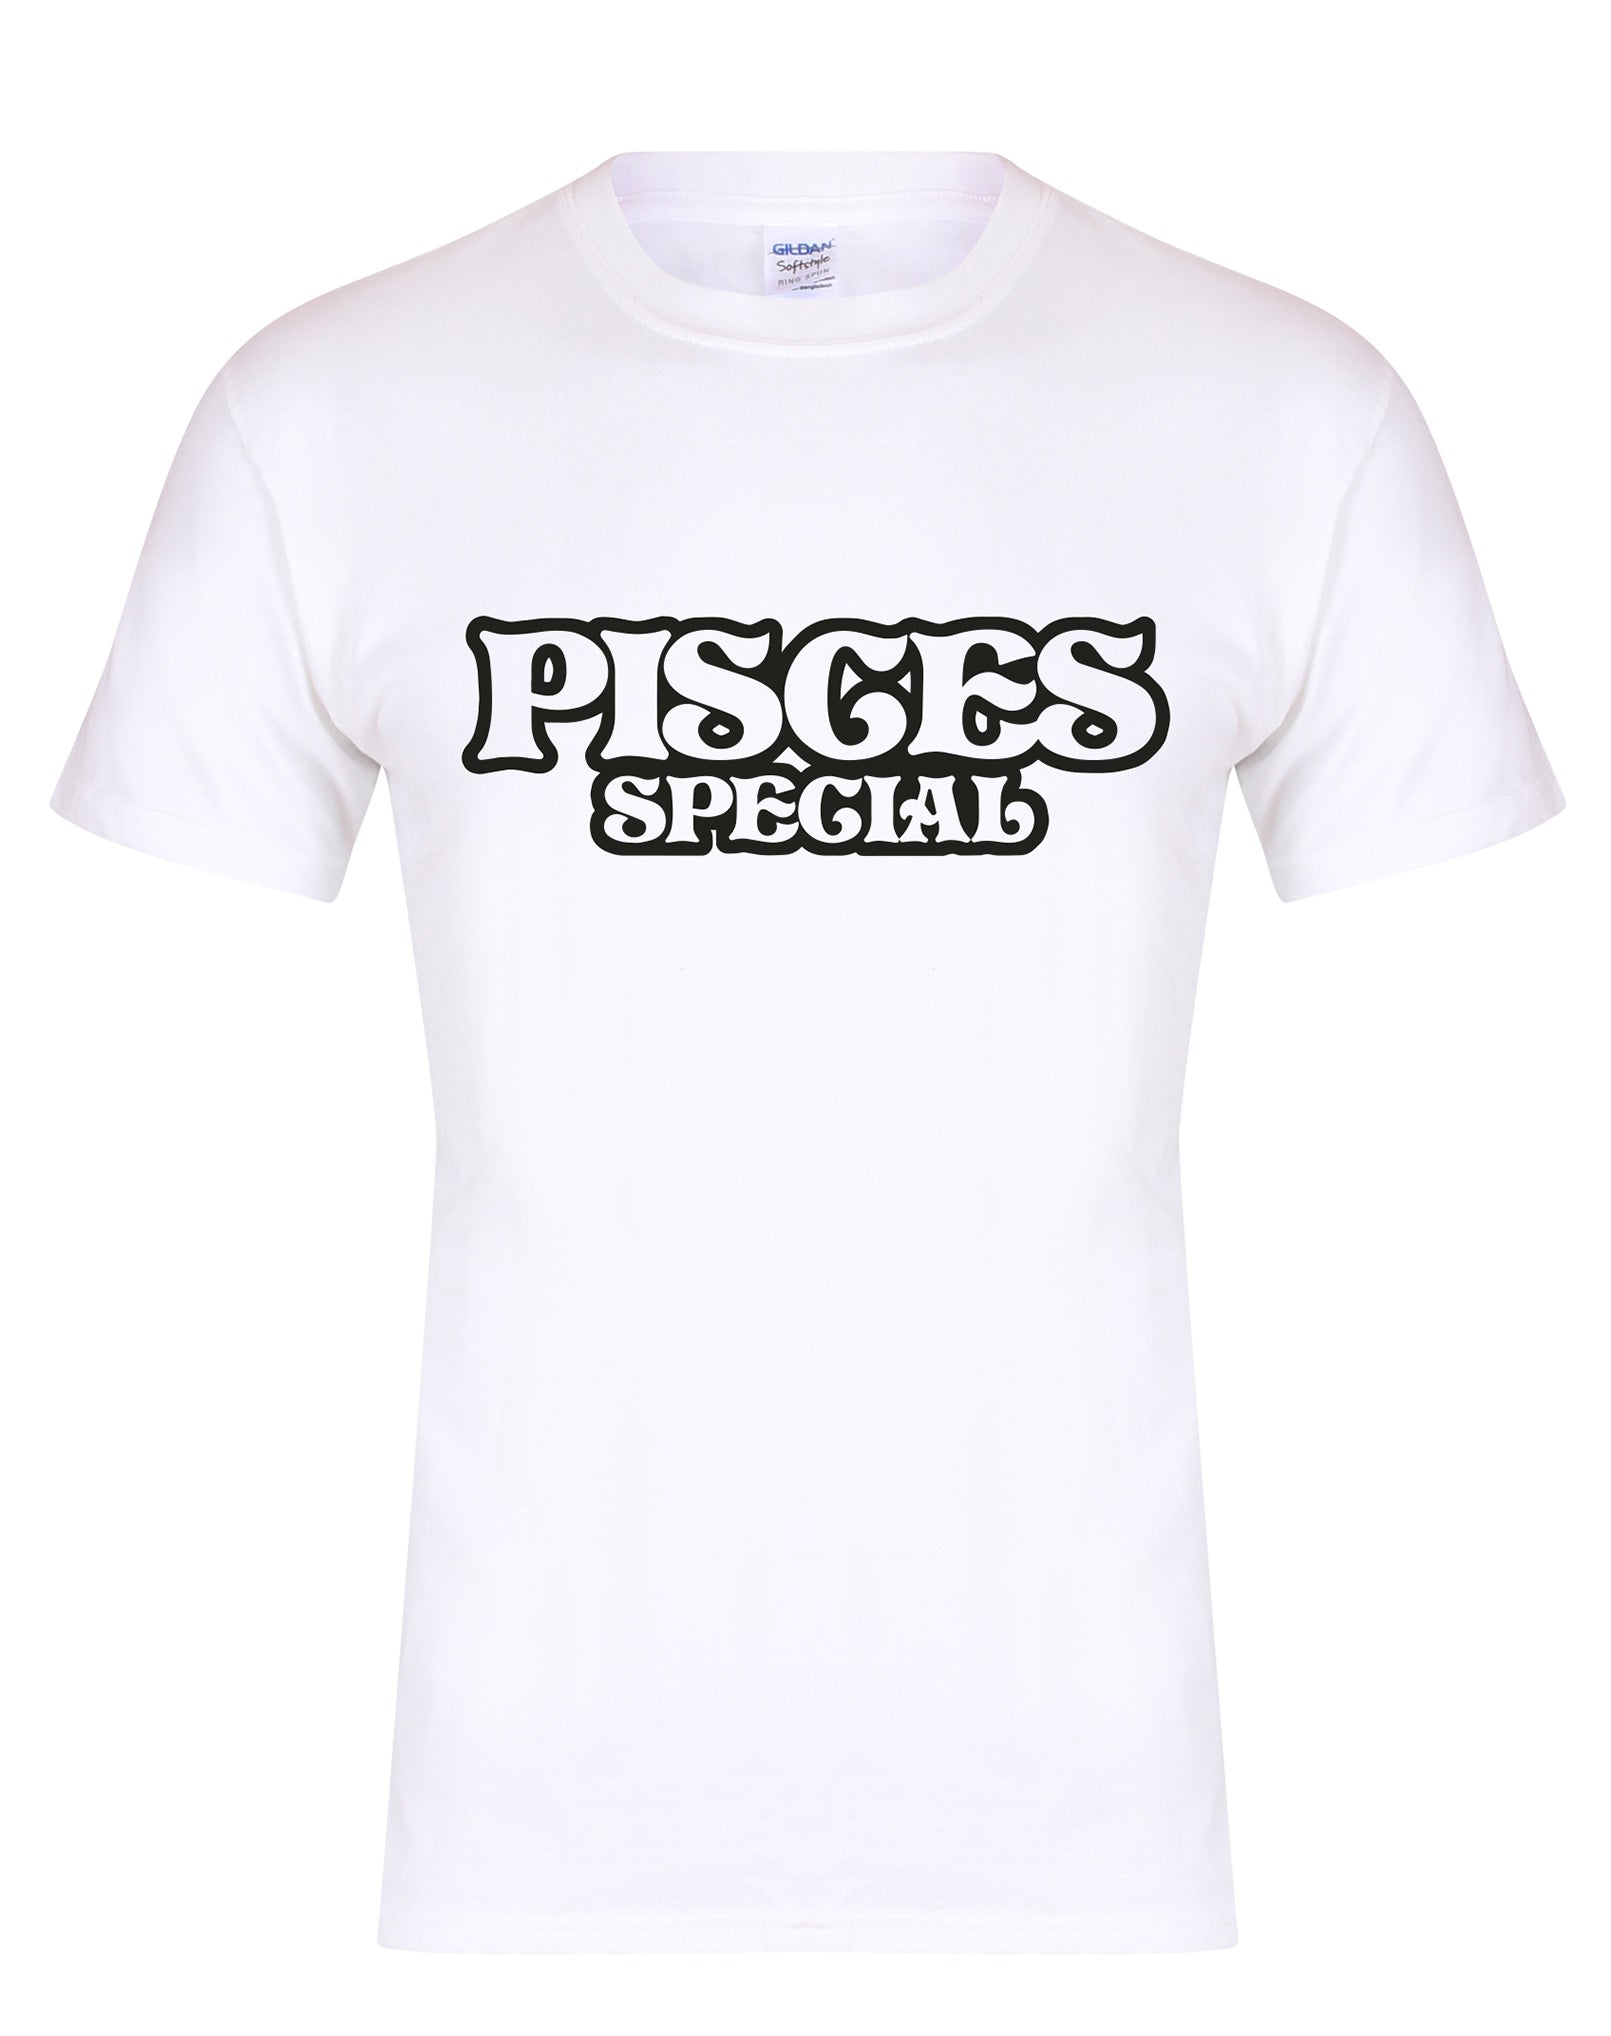 Pisces Special unisex fit T-shirt - various colours - Dirty Stop Outs